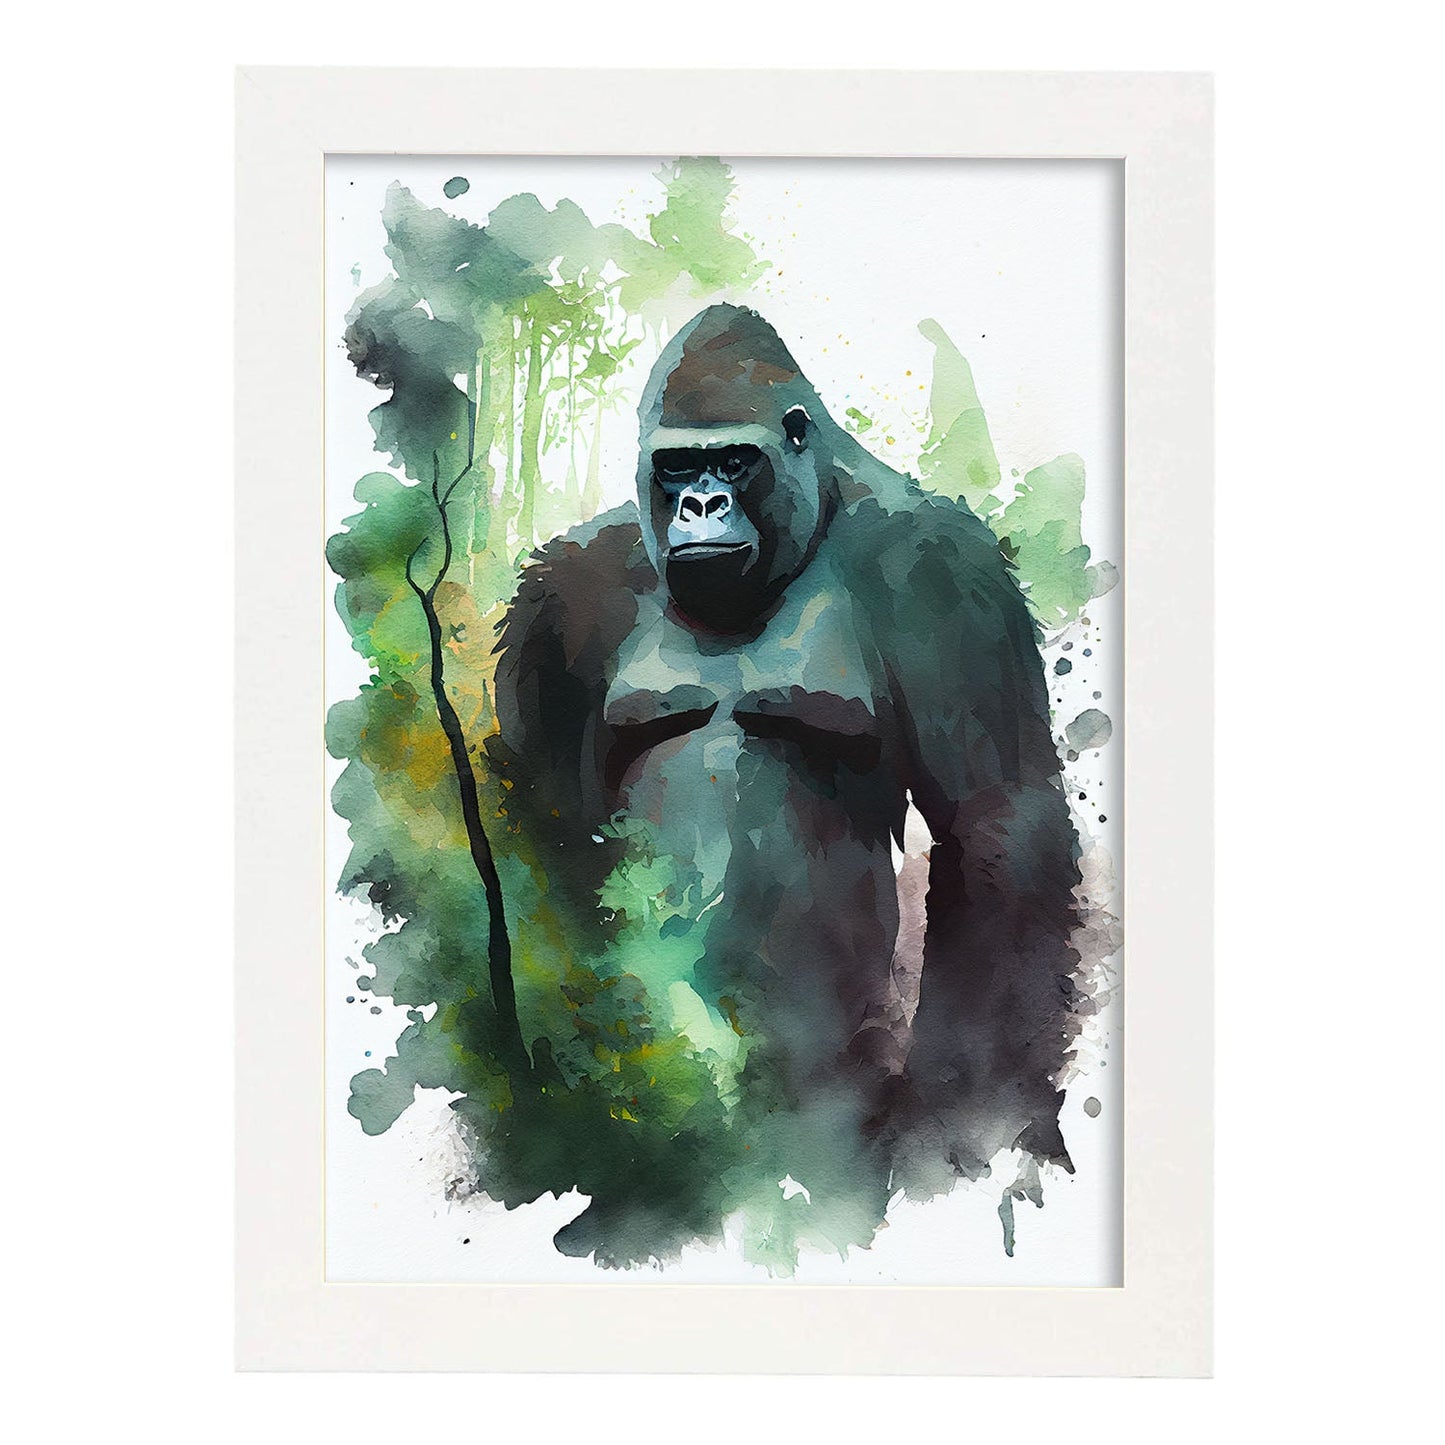 Nacnic Watercolor of Gorilla in the forest. Aesthetic Wall Art Prints for Bedroom or Living Room Design.